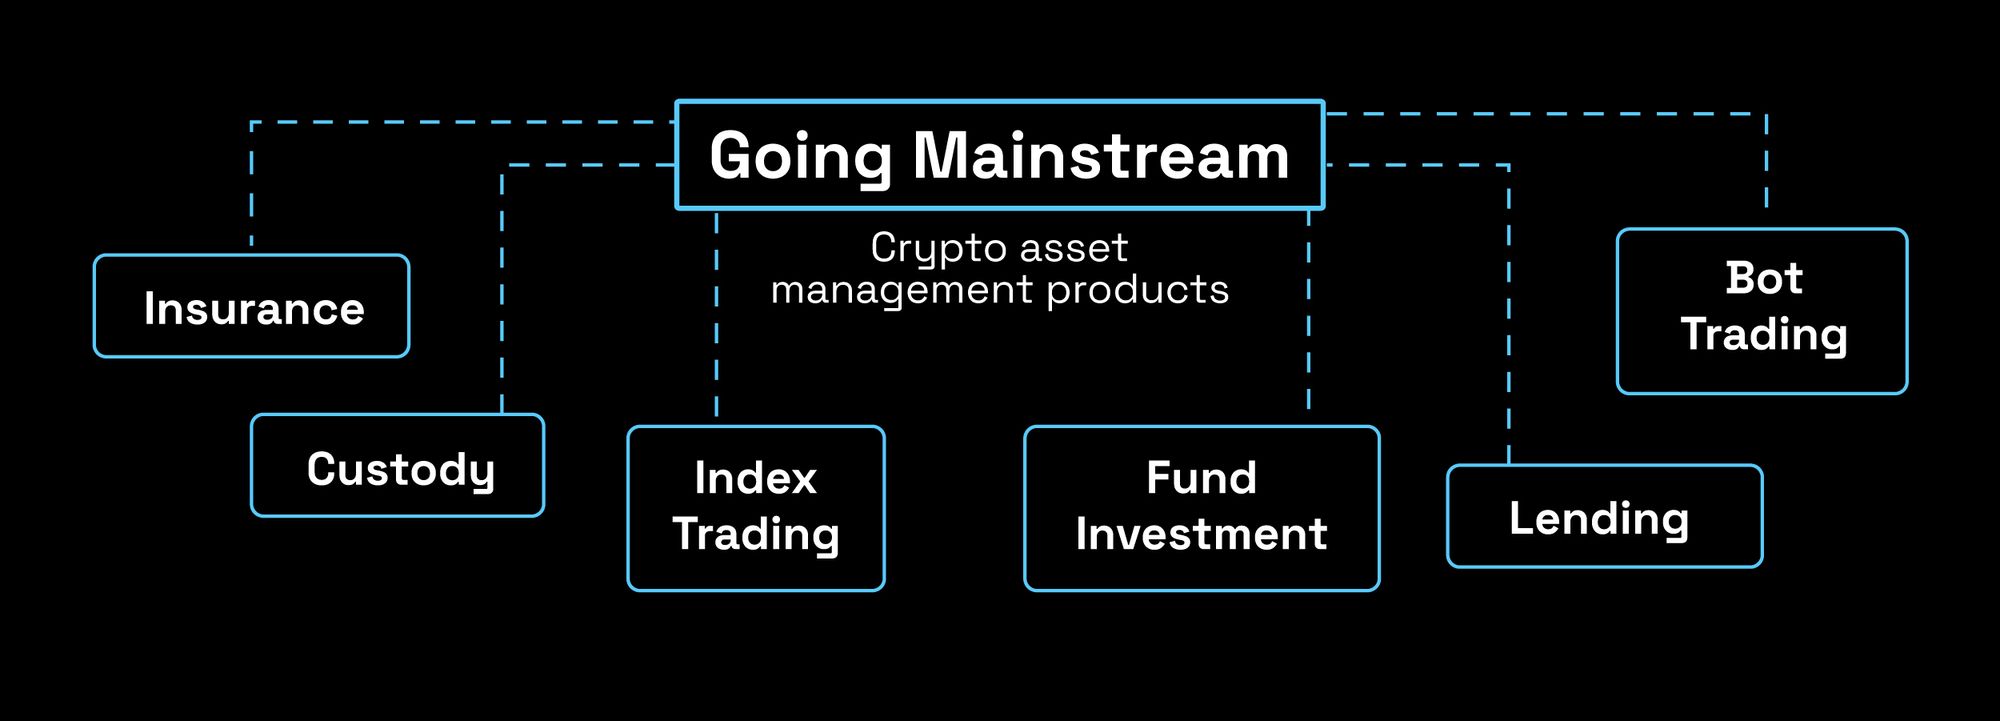 Going Mainstream - Crypto asset management products